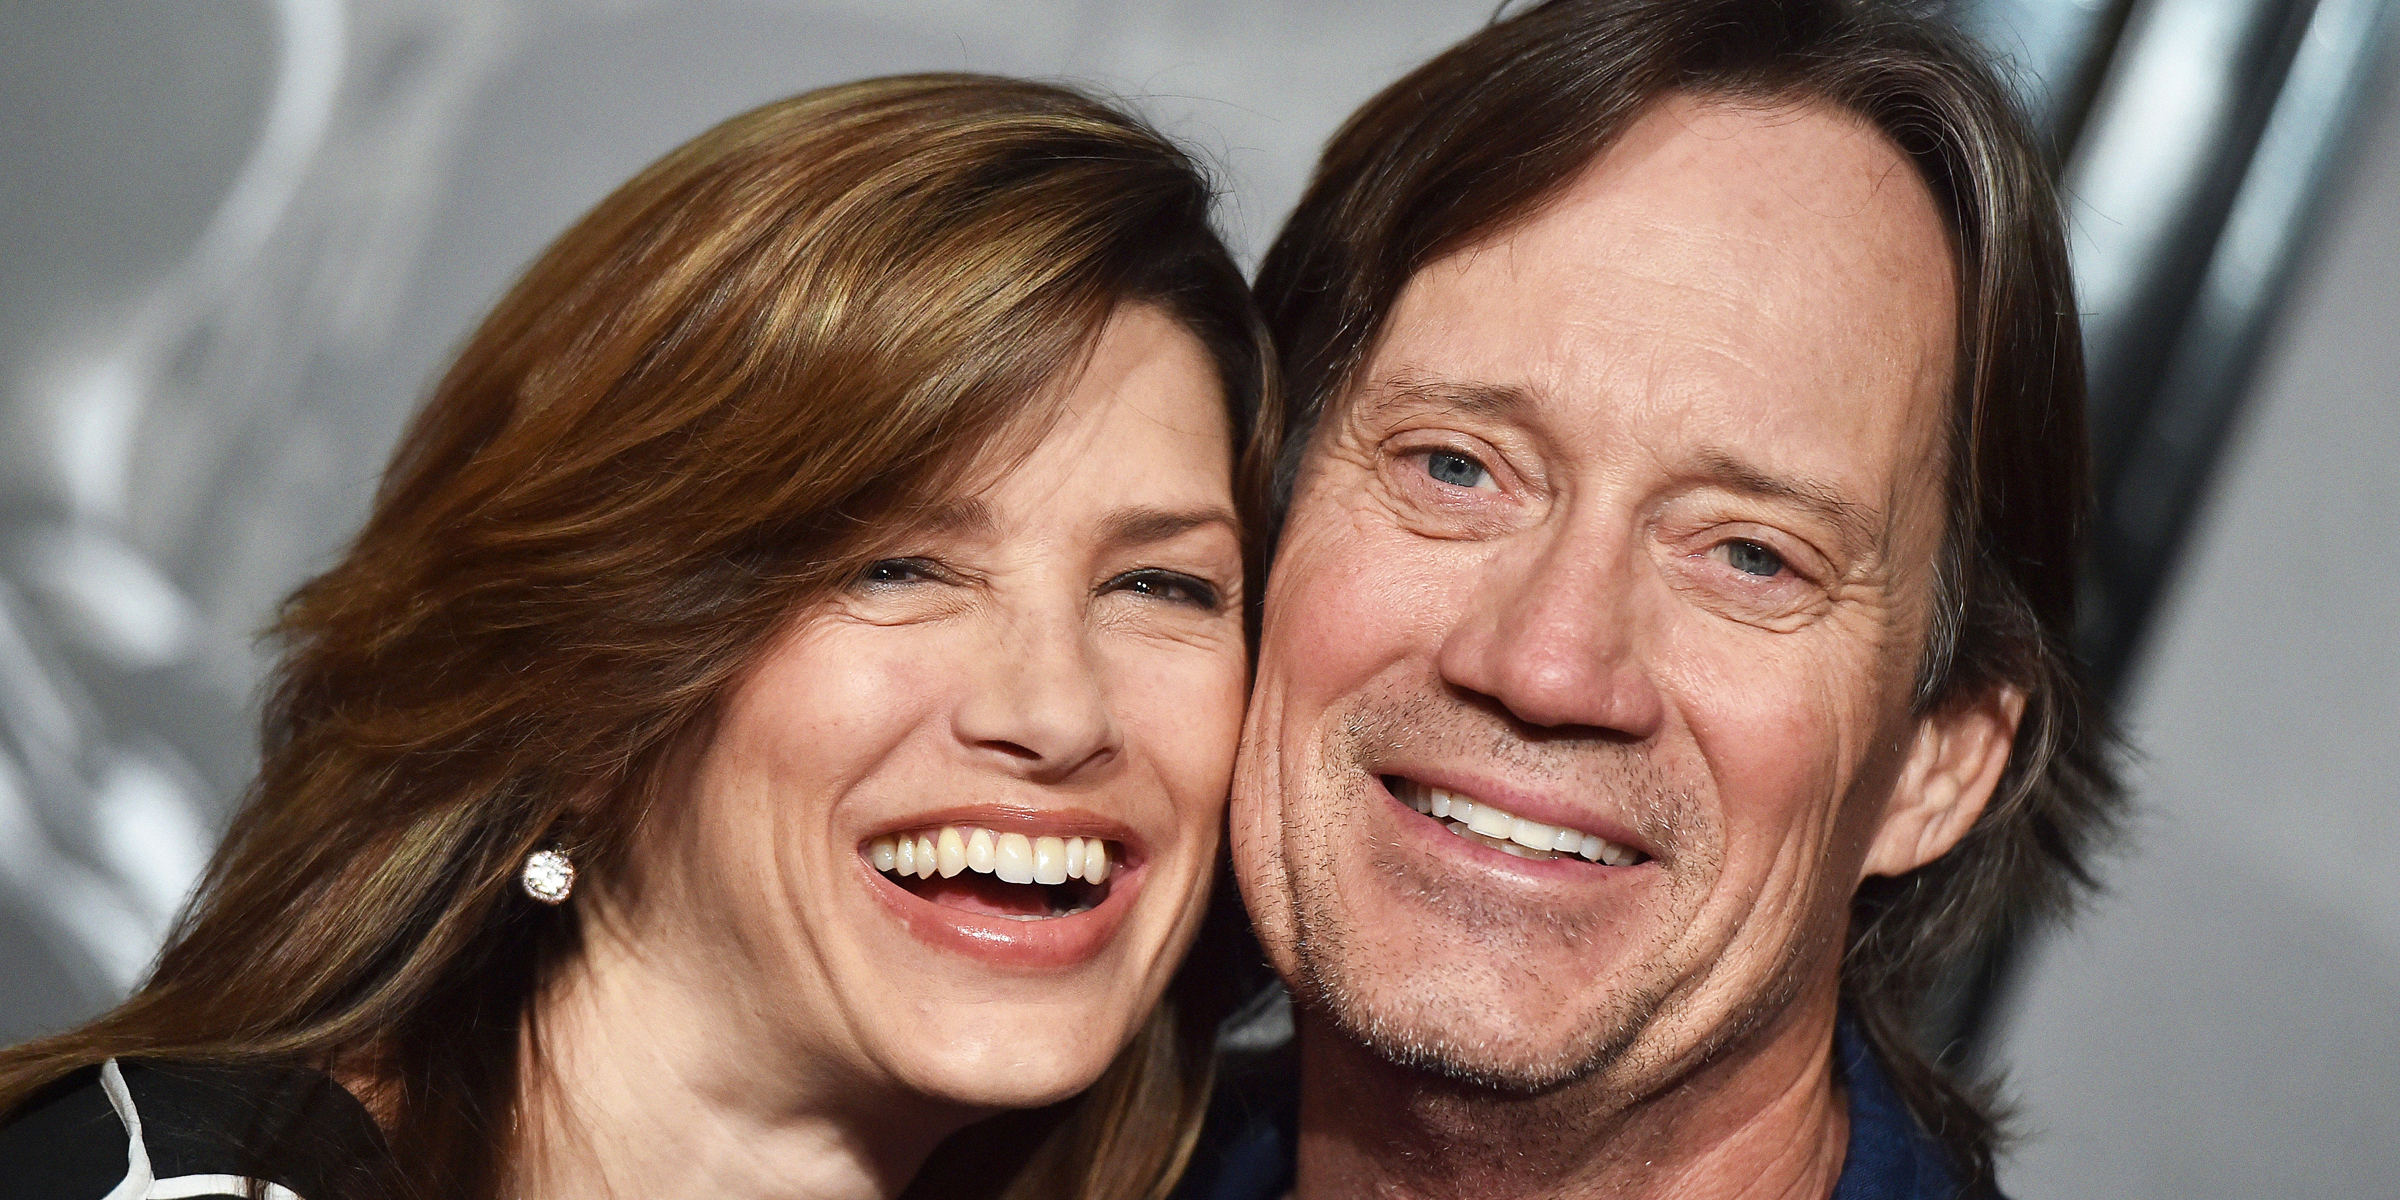 Kevin and Sam Sorbo | Source: Getty Images